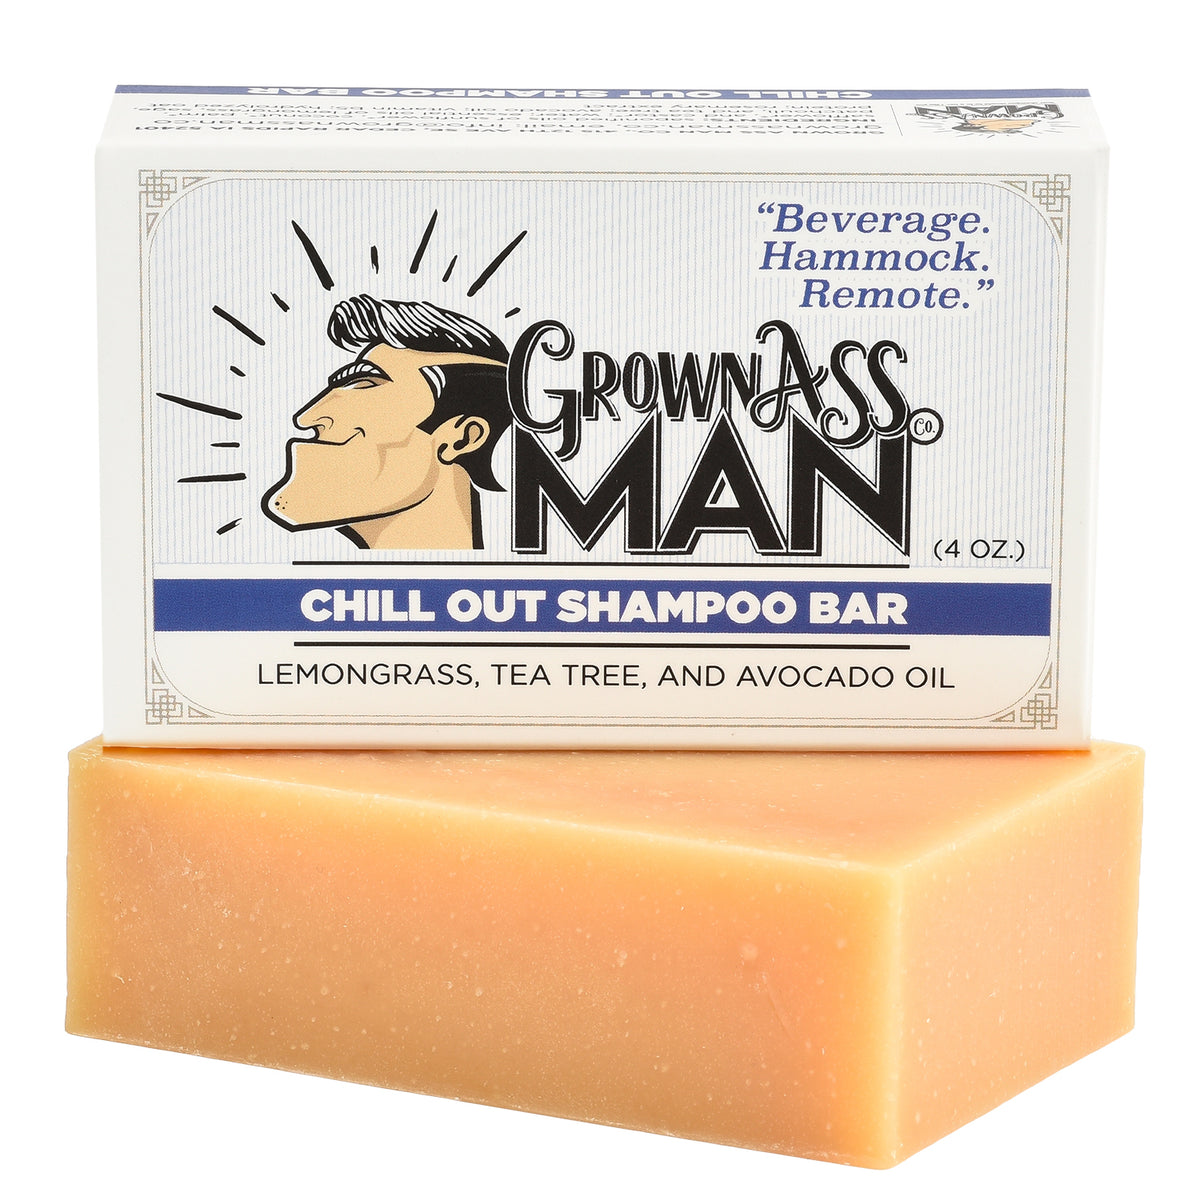 Chill Out Shampoo Bar - 3 Pack